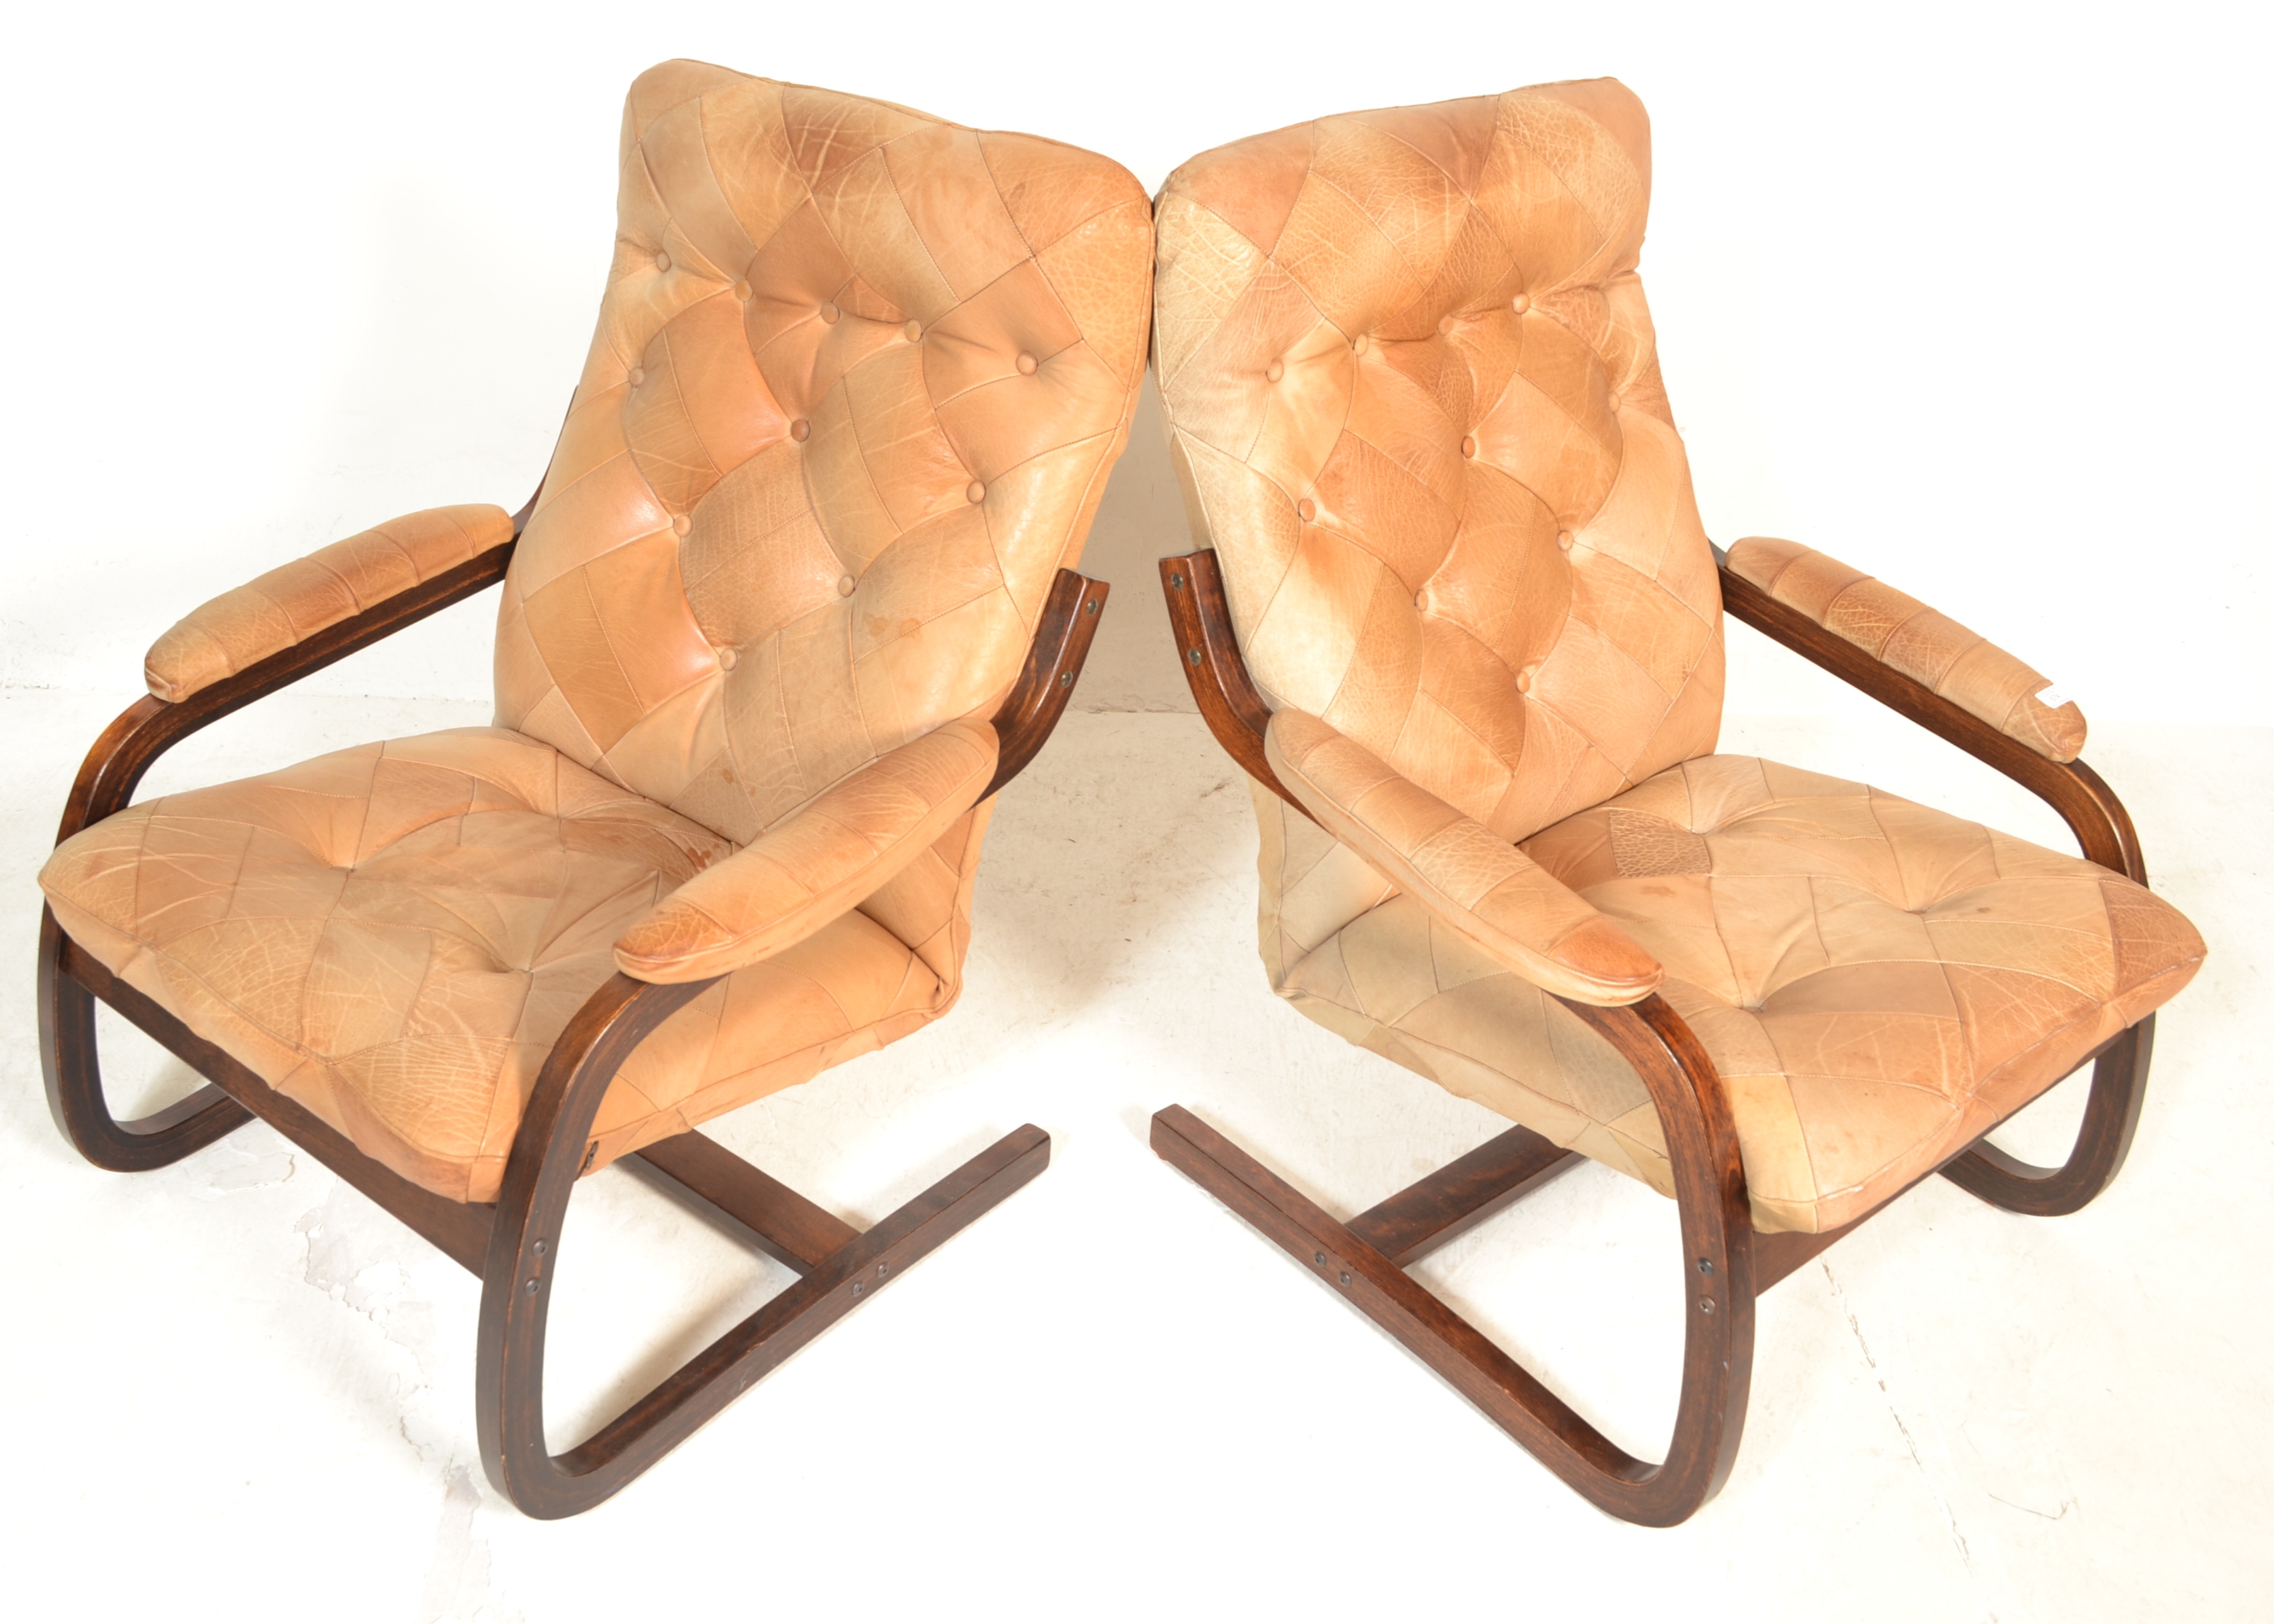 PAIR OF VINTAGE 1970'S DANISH RETRO LEATHER SLING ARM CHAIRS - Image 2 of 4